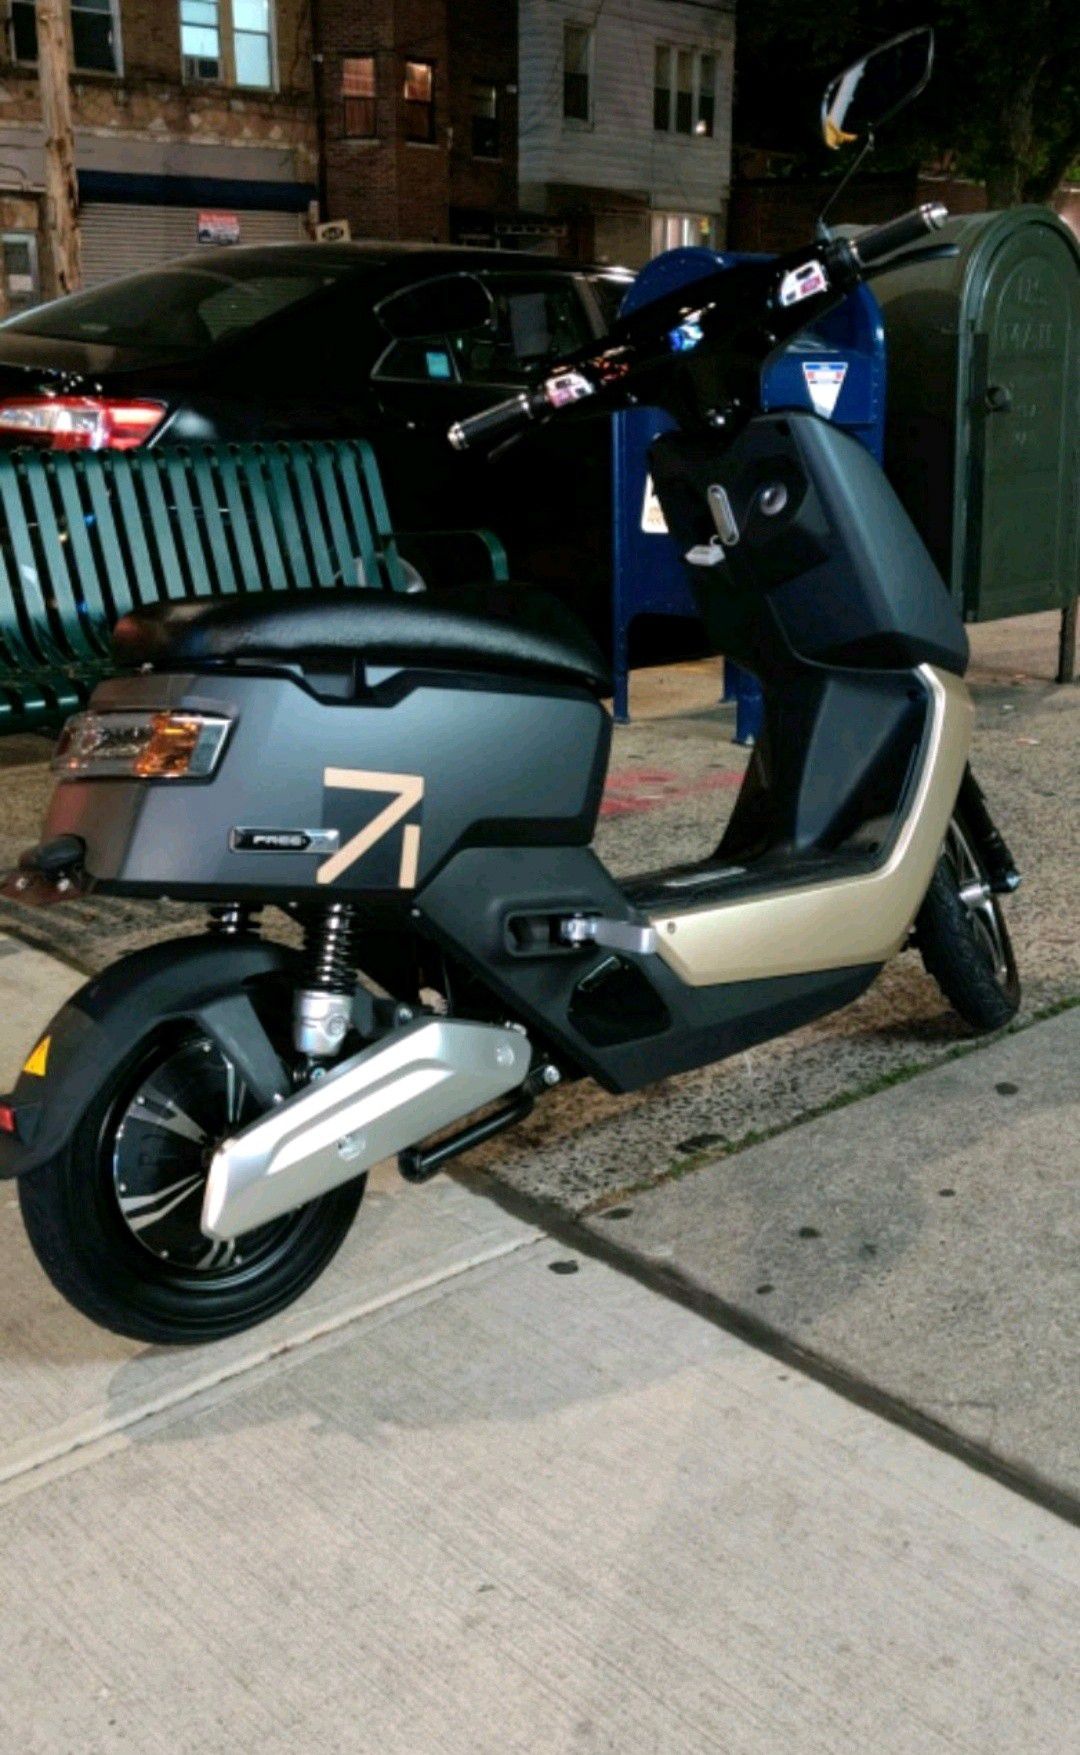 Brand New Electric scooter e scooter bicycle ebike motorcycle bicycle e